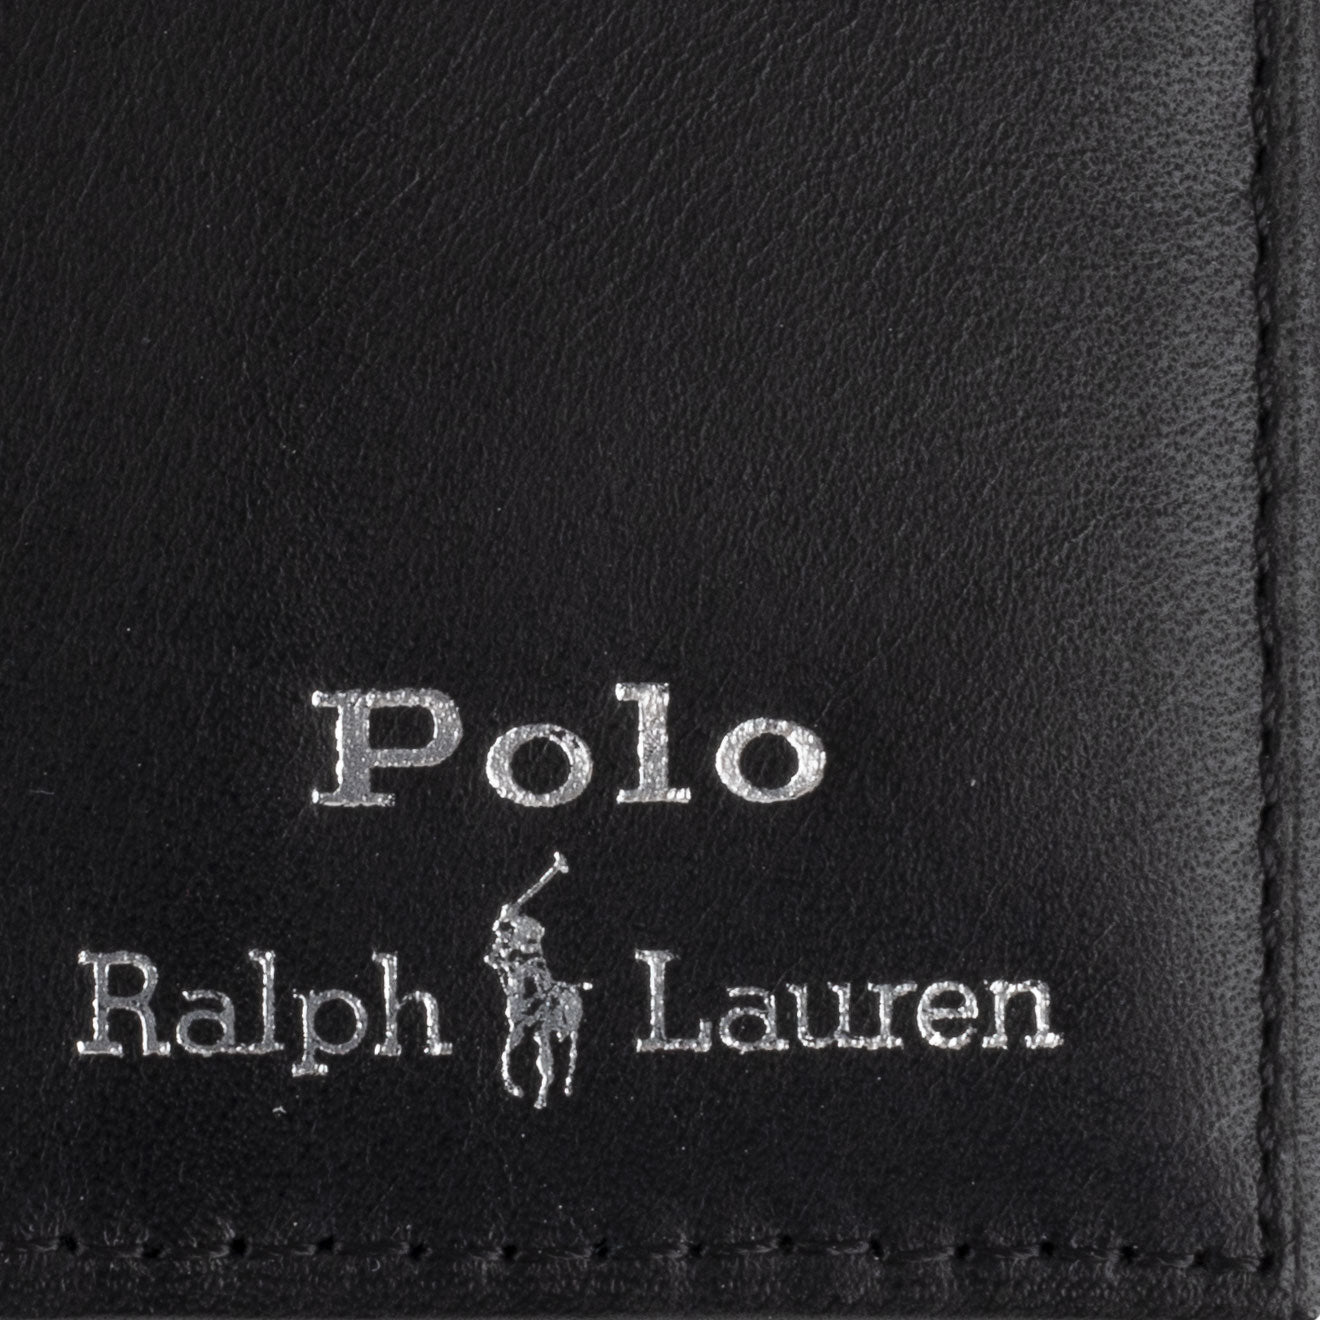 Polo Ralph Lauren Leather Billfold Wallet Black | The Sporting Lodge